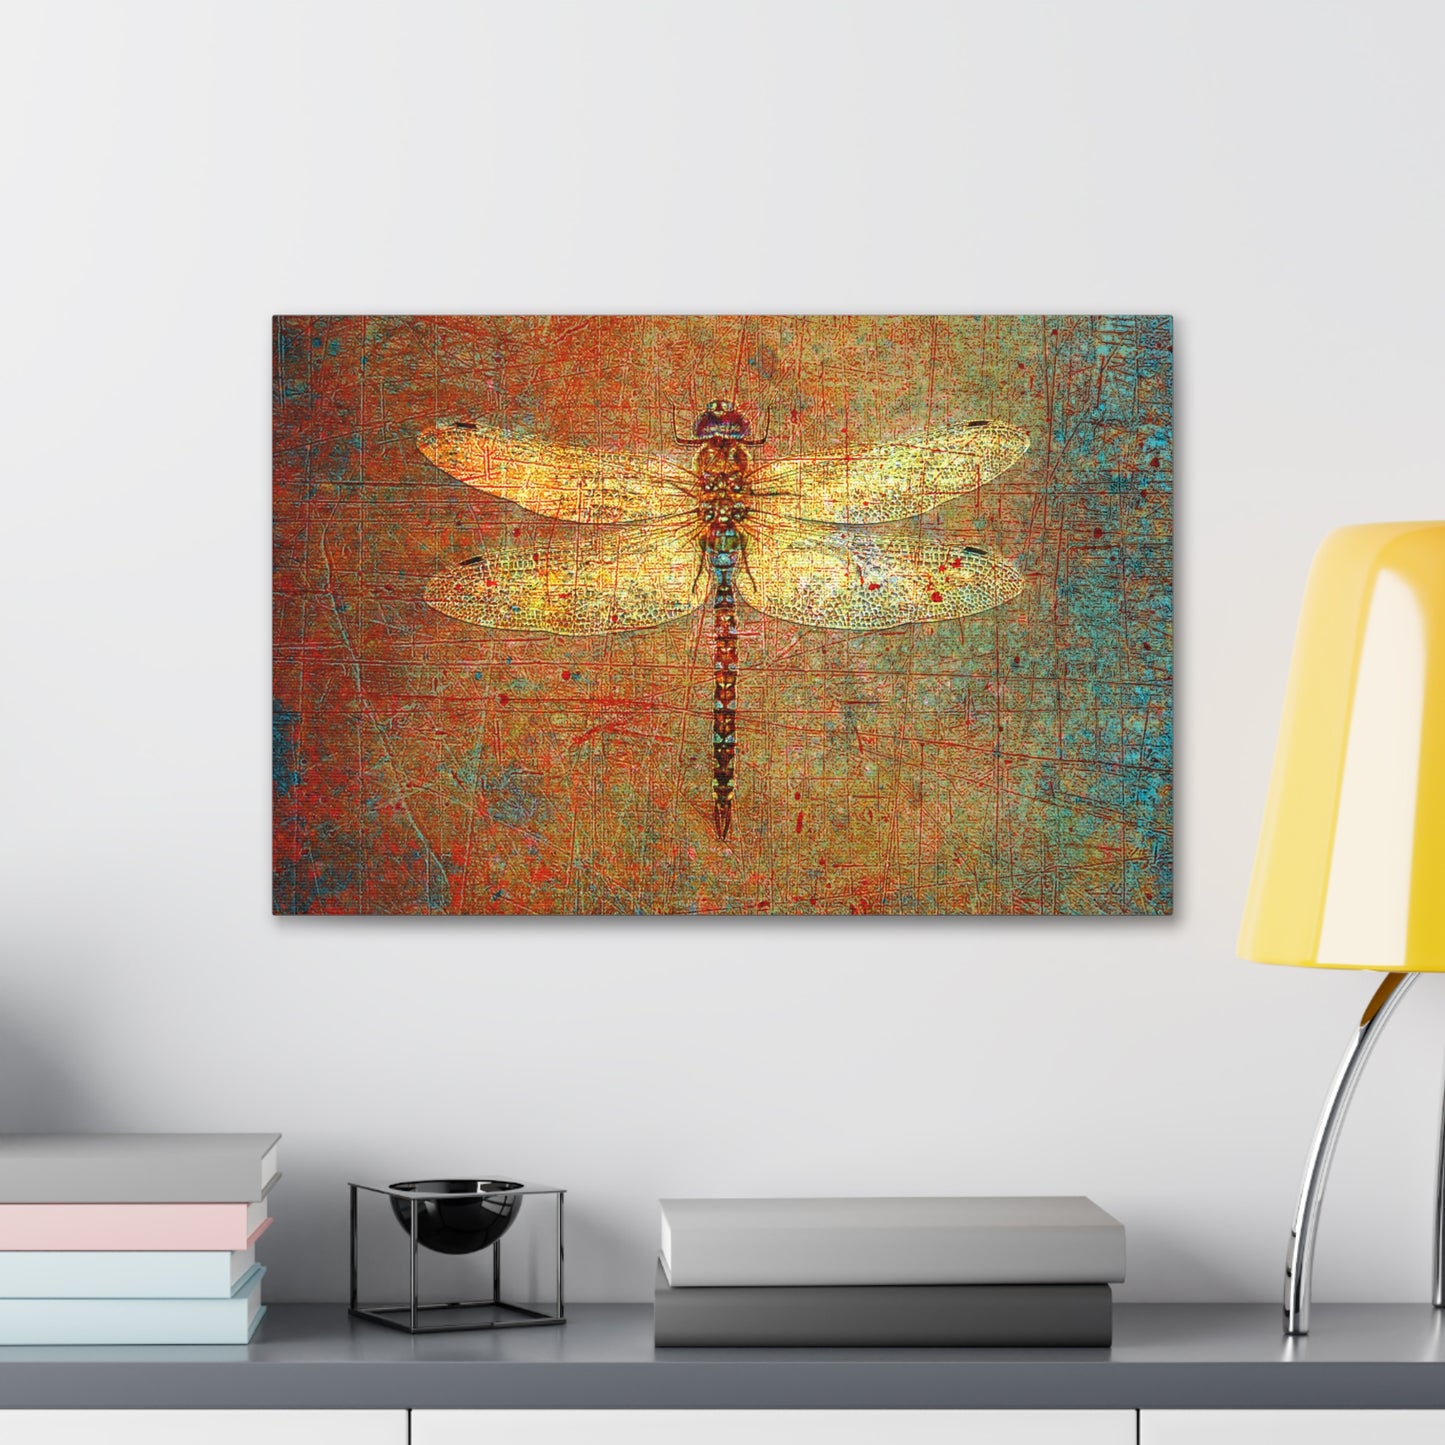 Golden Dragonfly on Distressed Orange and Green Background Print on Unframed Stretched Canvas 24x16